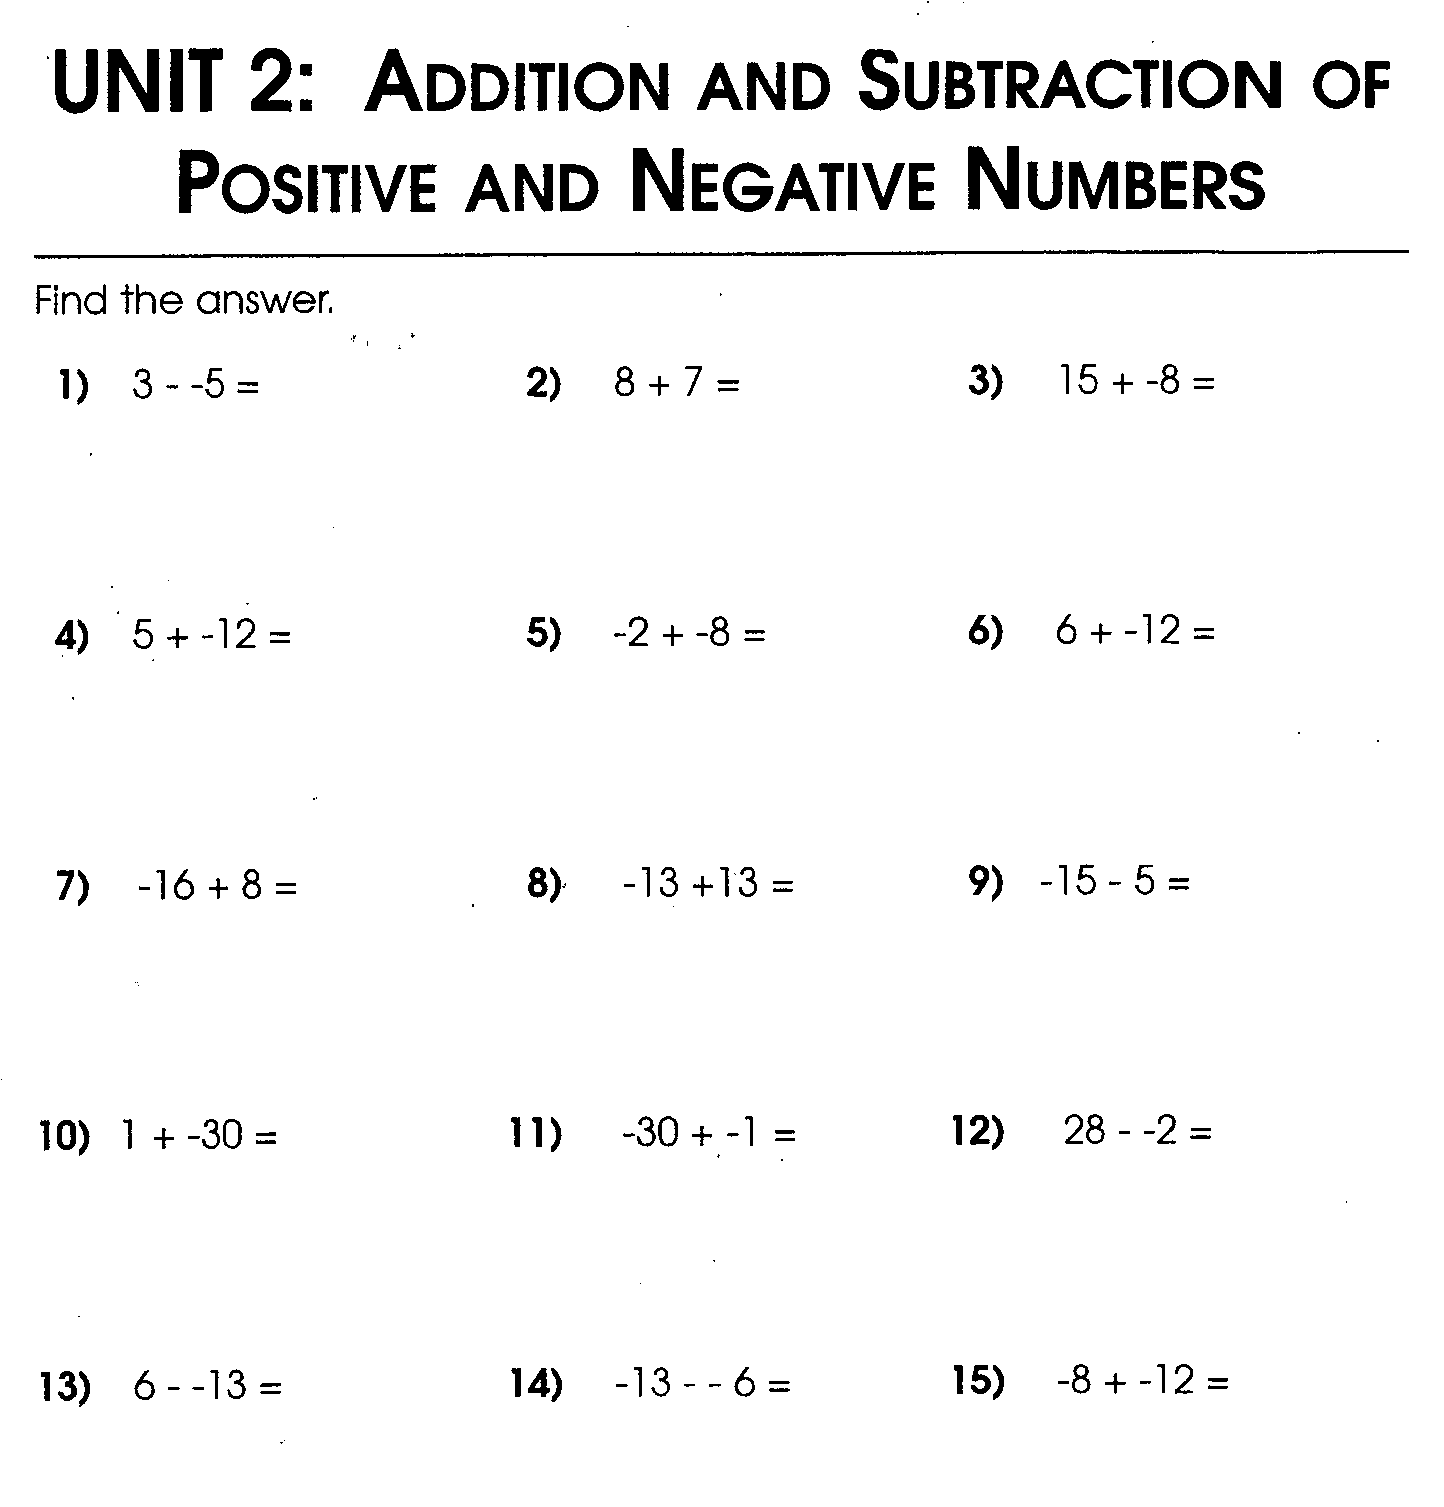 Adding And Subtracting Negative And Positive Numbers Worksheet